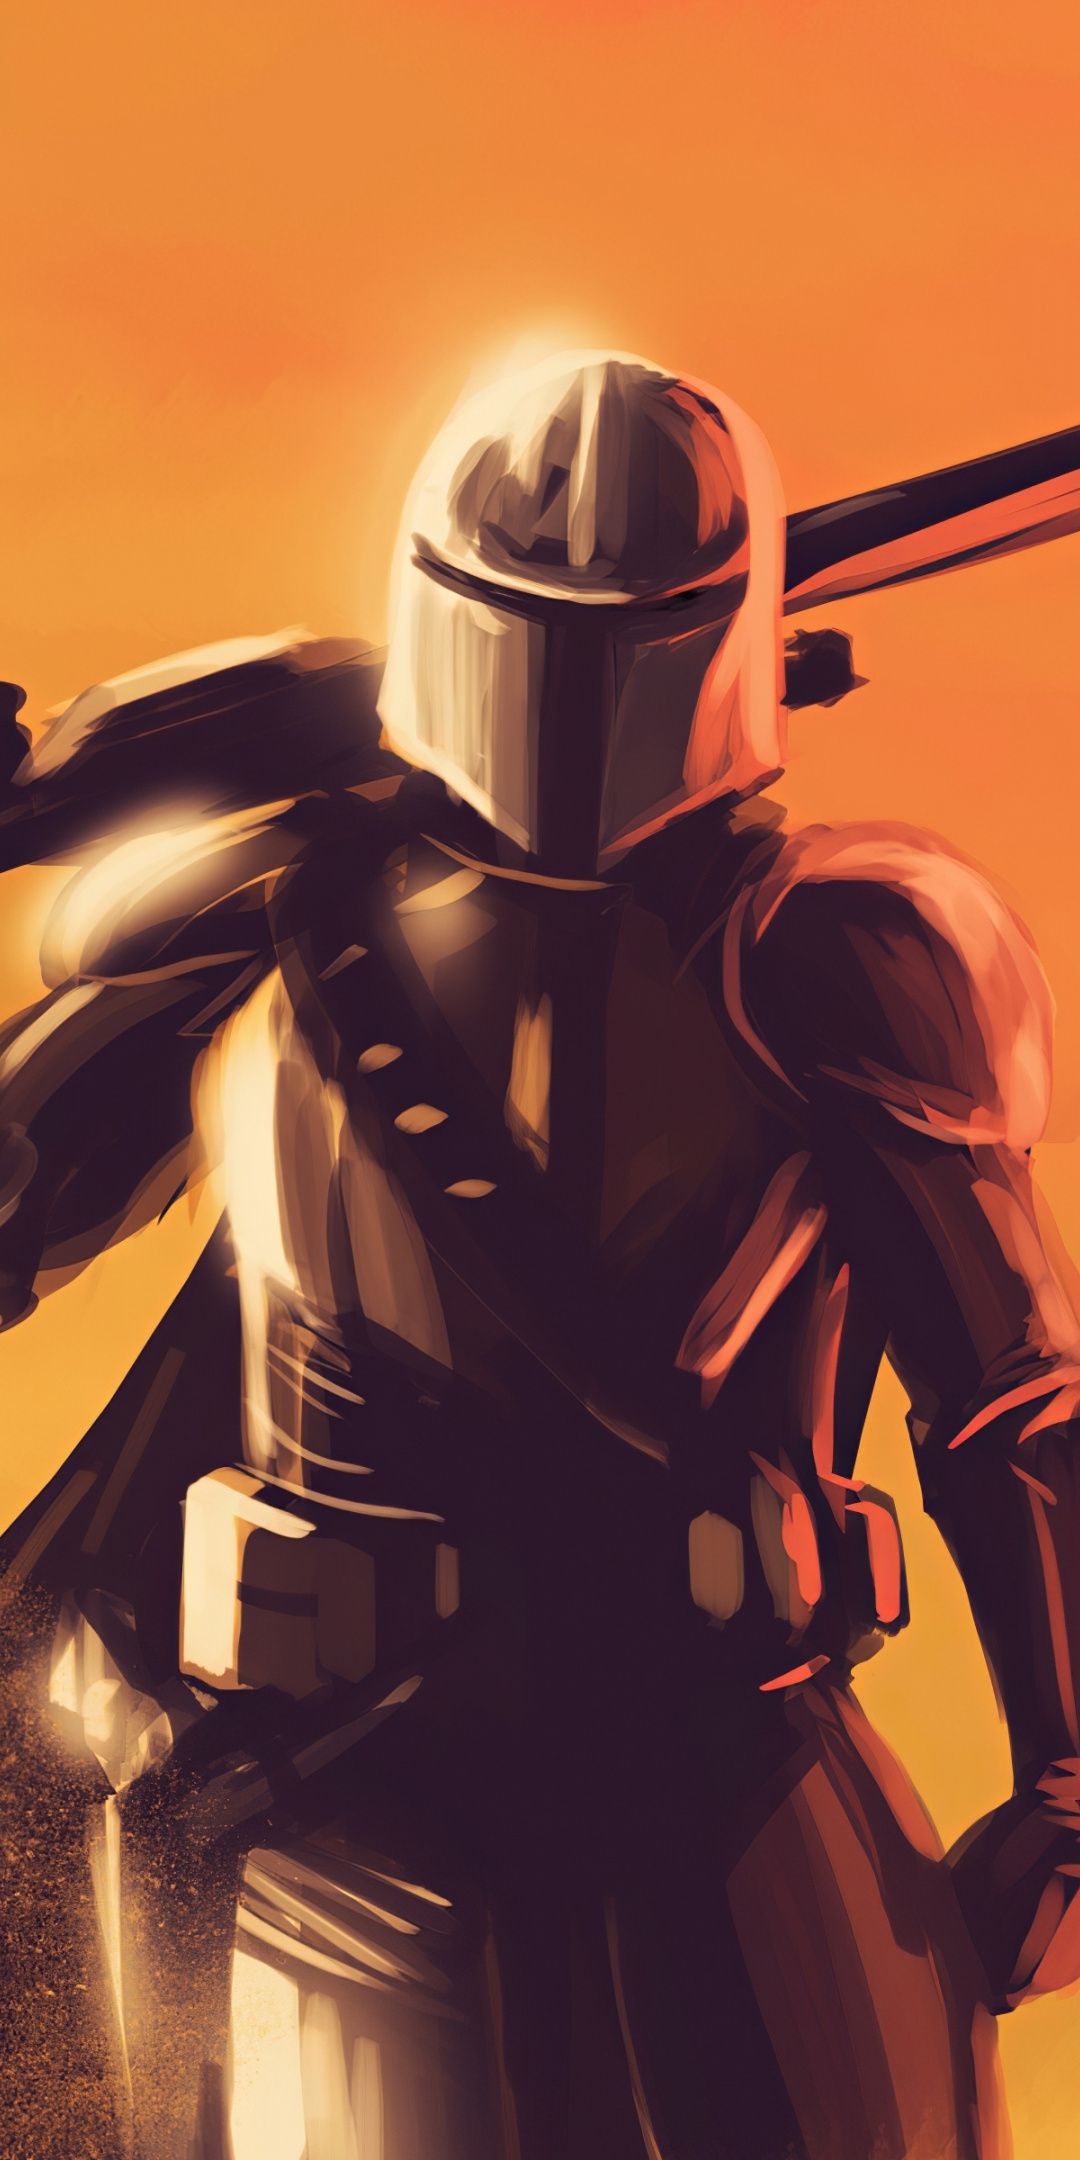 Artwork, soldier, star wars, The Mandalorian wallpaper. Darth vader wallpaper, Star wars wallpaper, Star wars awesome